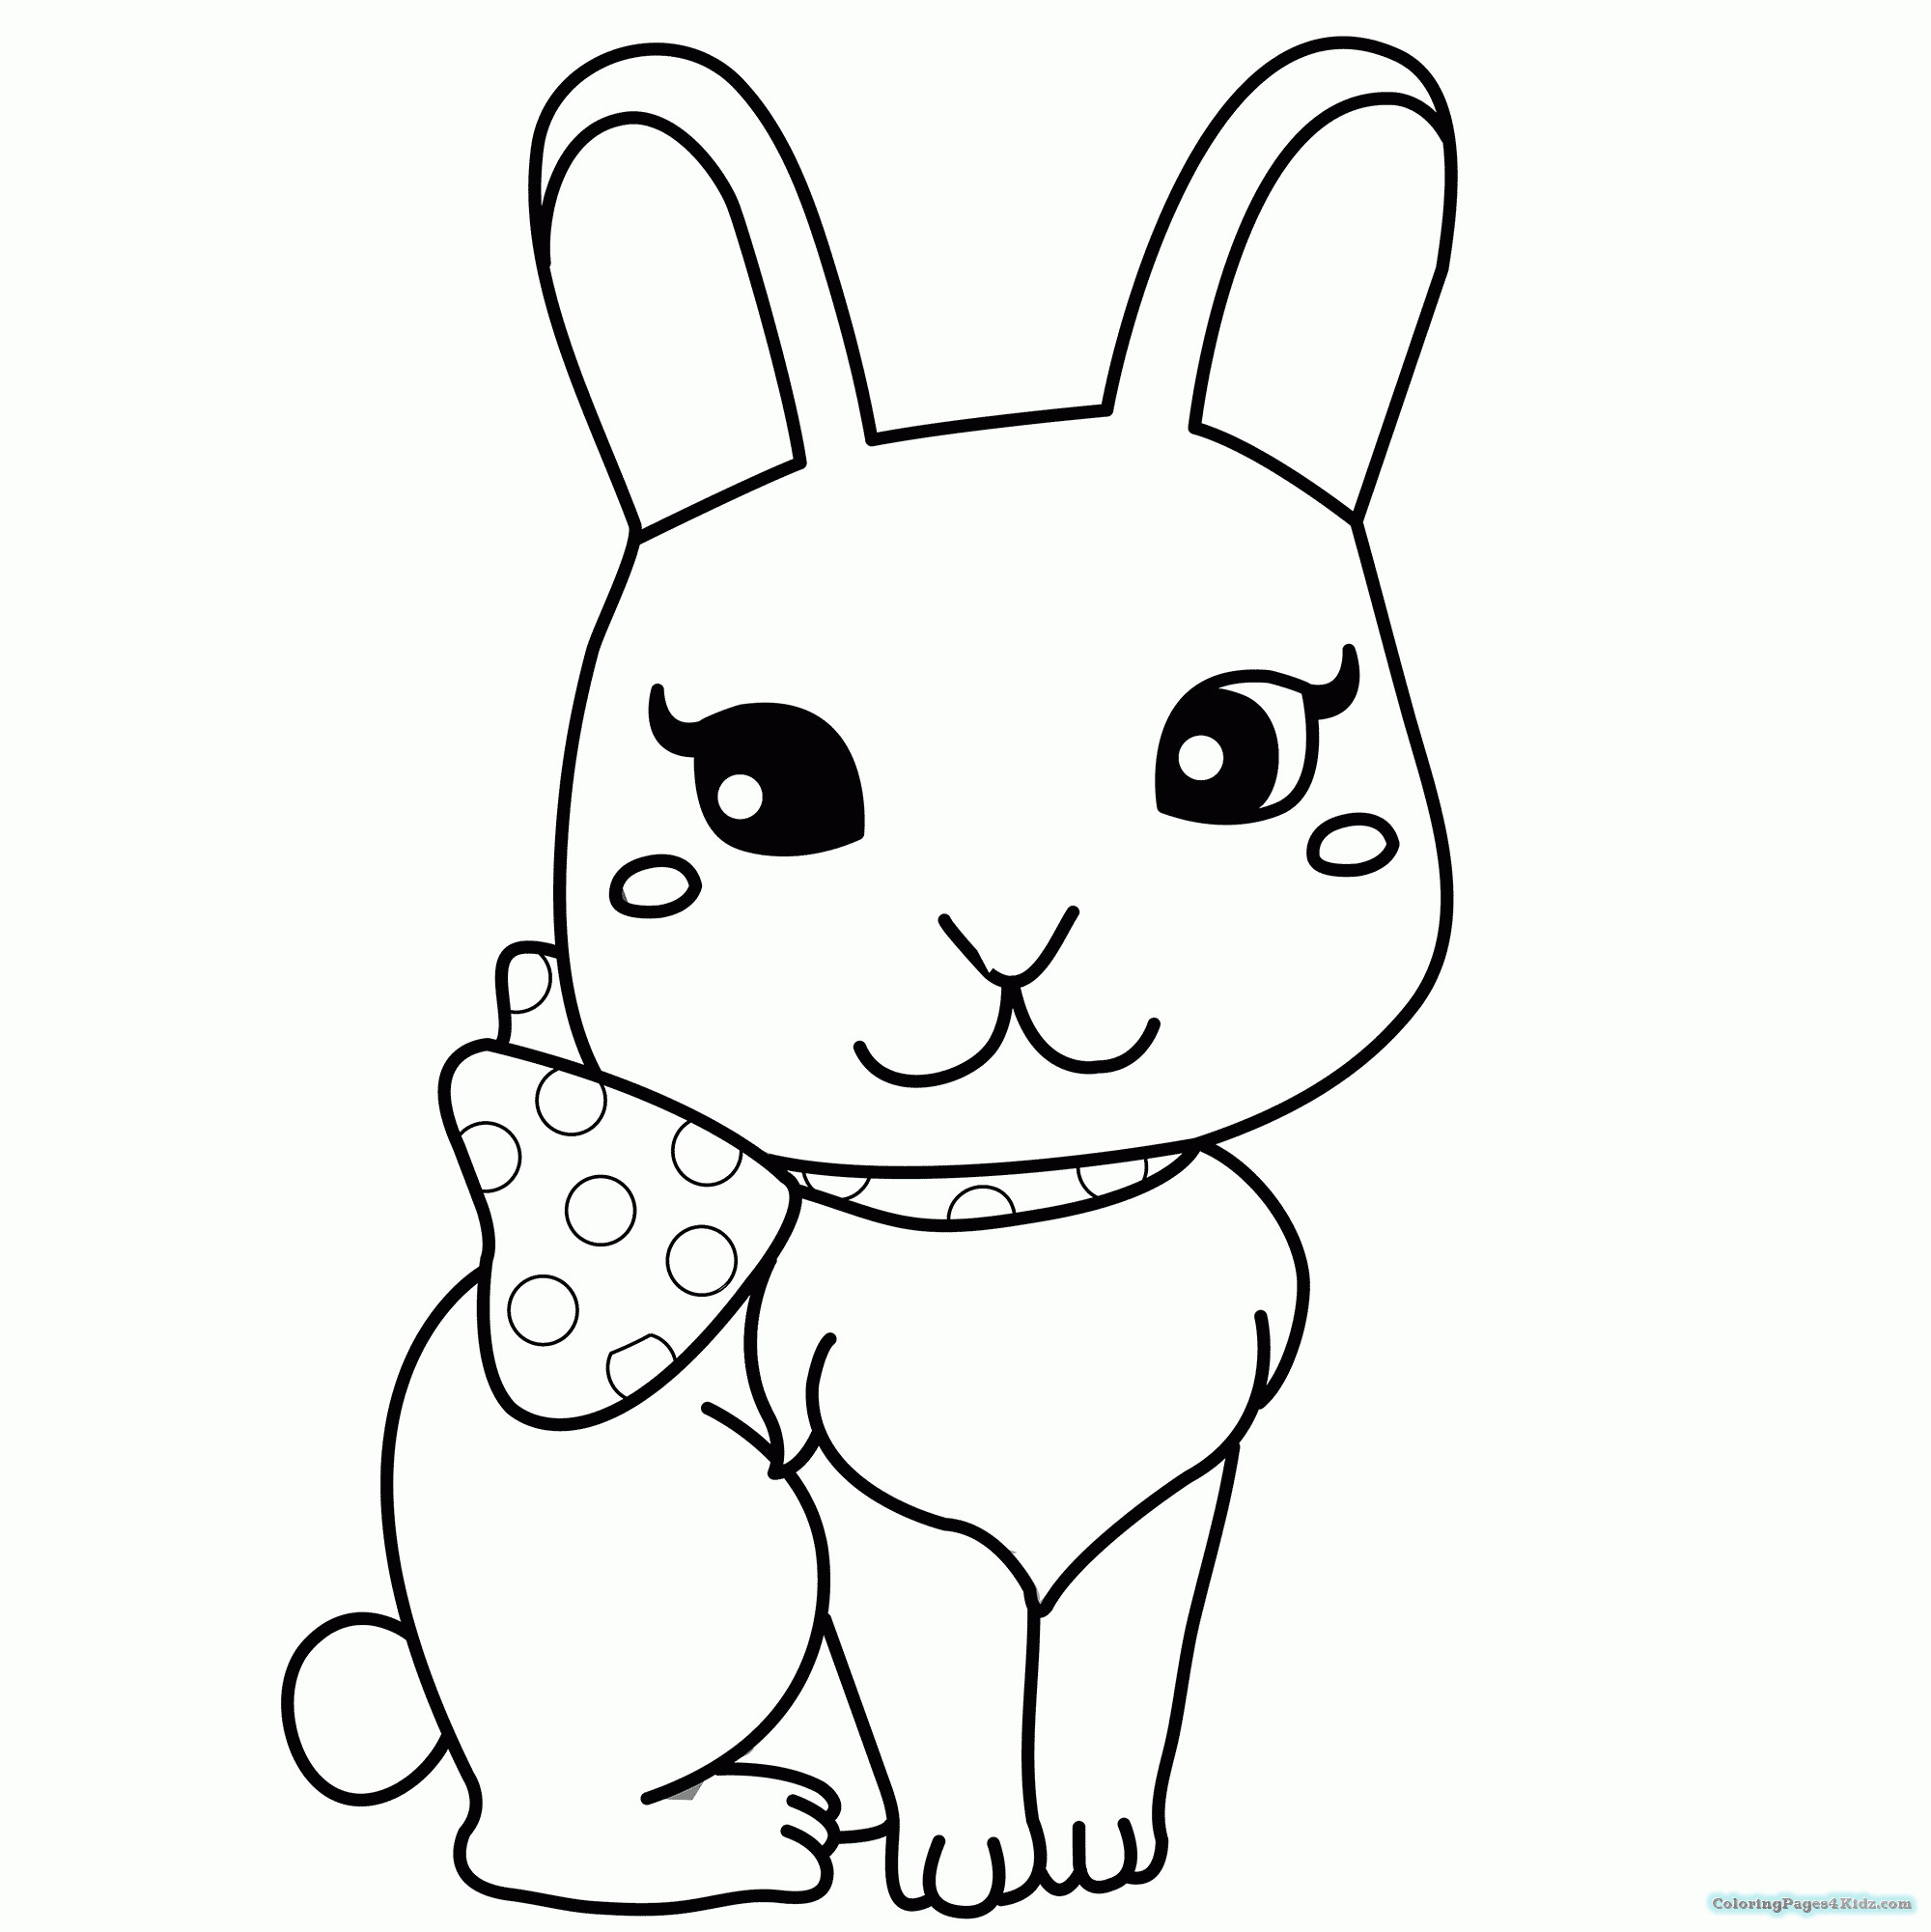 Baby Bunny Coloring Page
 Cute Coloring Pages Baby Bunnies